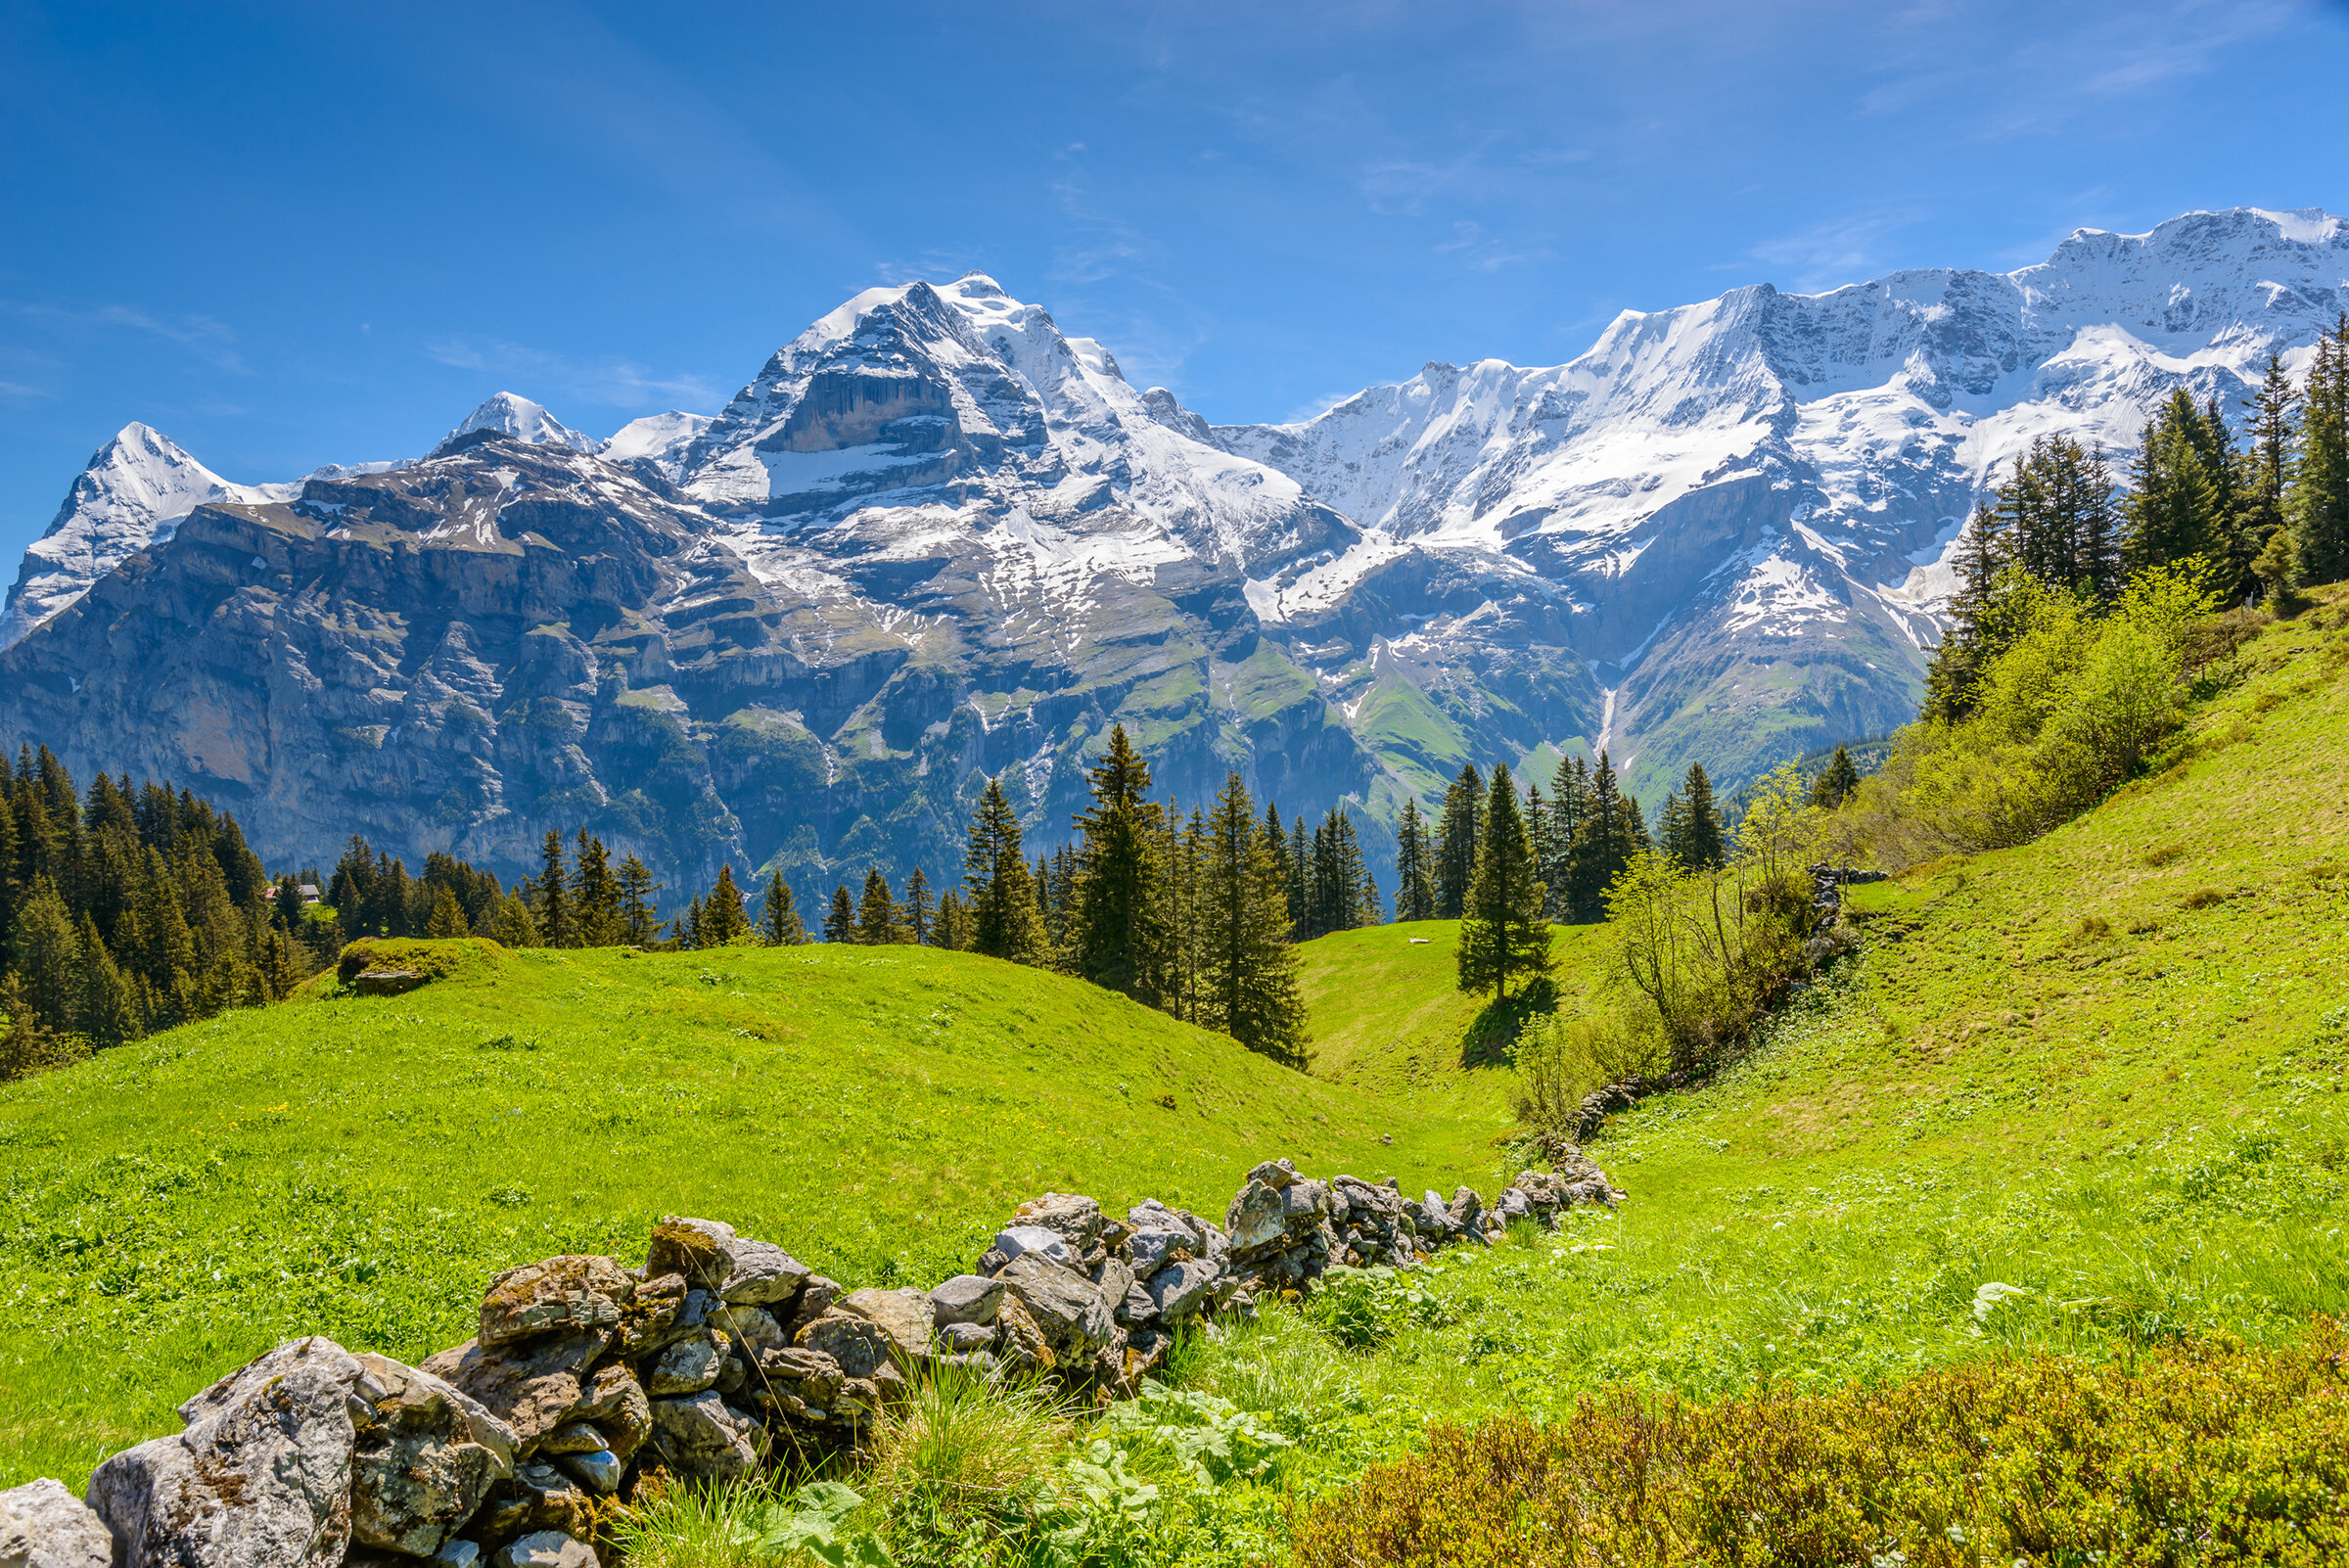  The peaks of the Jungfrau region viewed from a summer alp above the village of Mürren. 